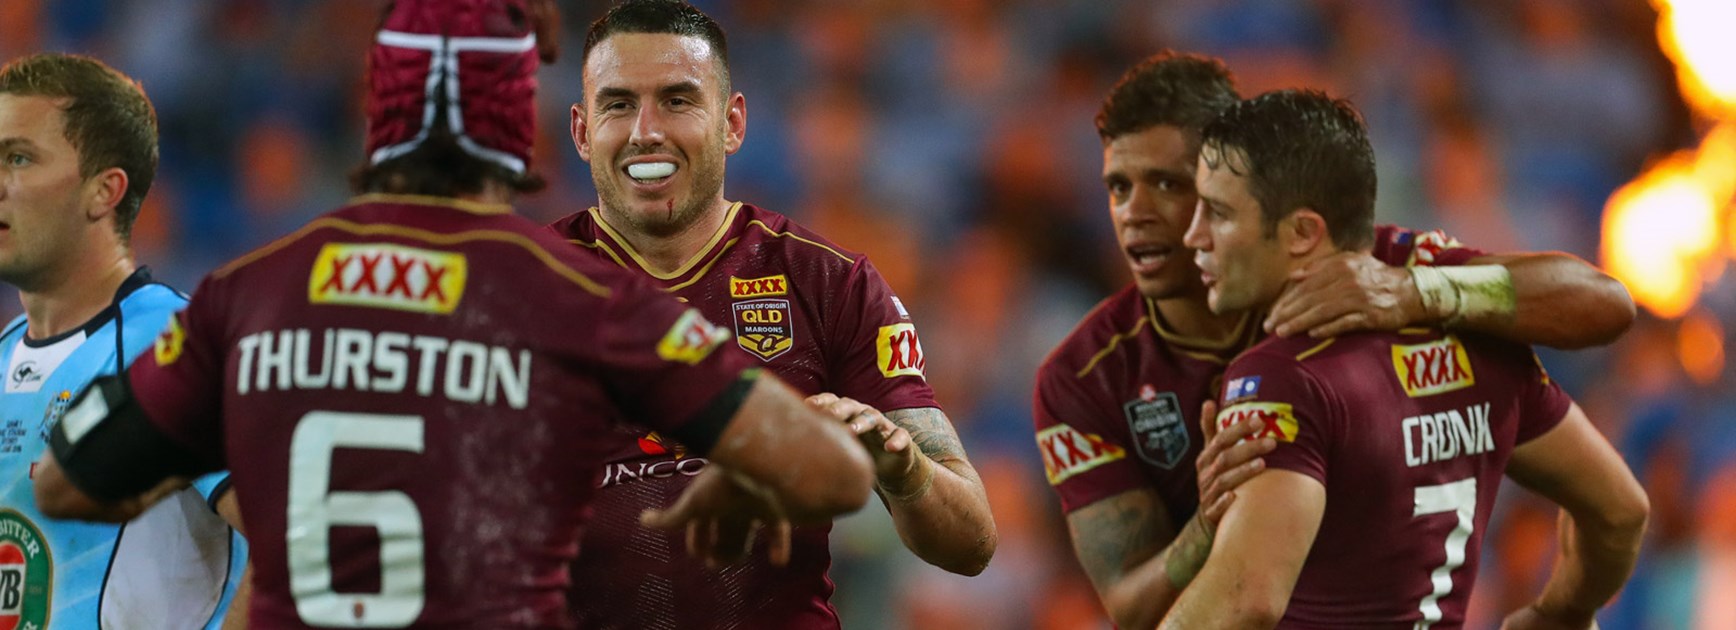 Queensland players celebrate during the opening game of the 2016 Origin series.